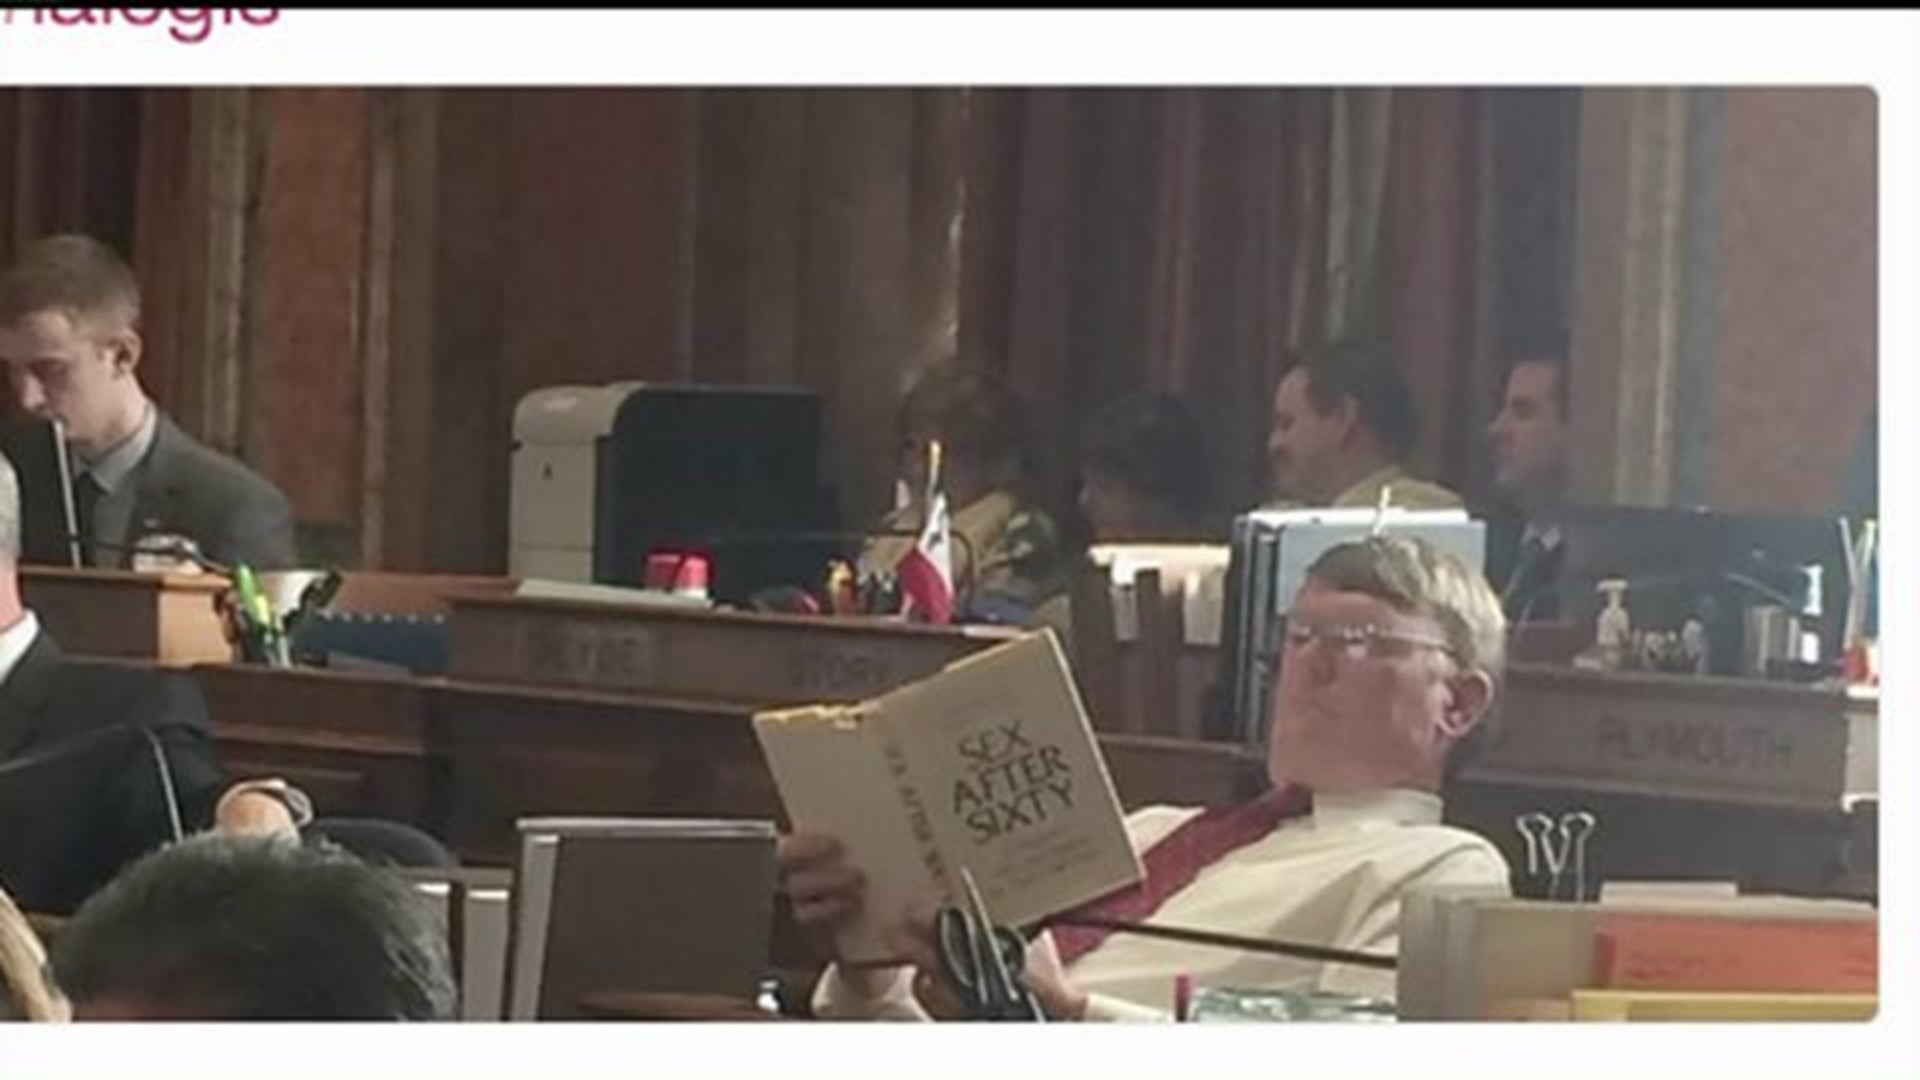 Lawmaker spotted reading tells what really happened